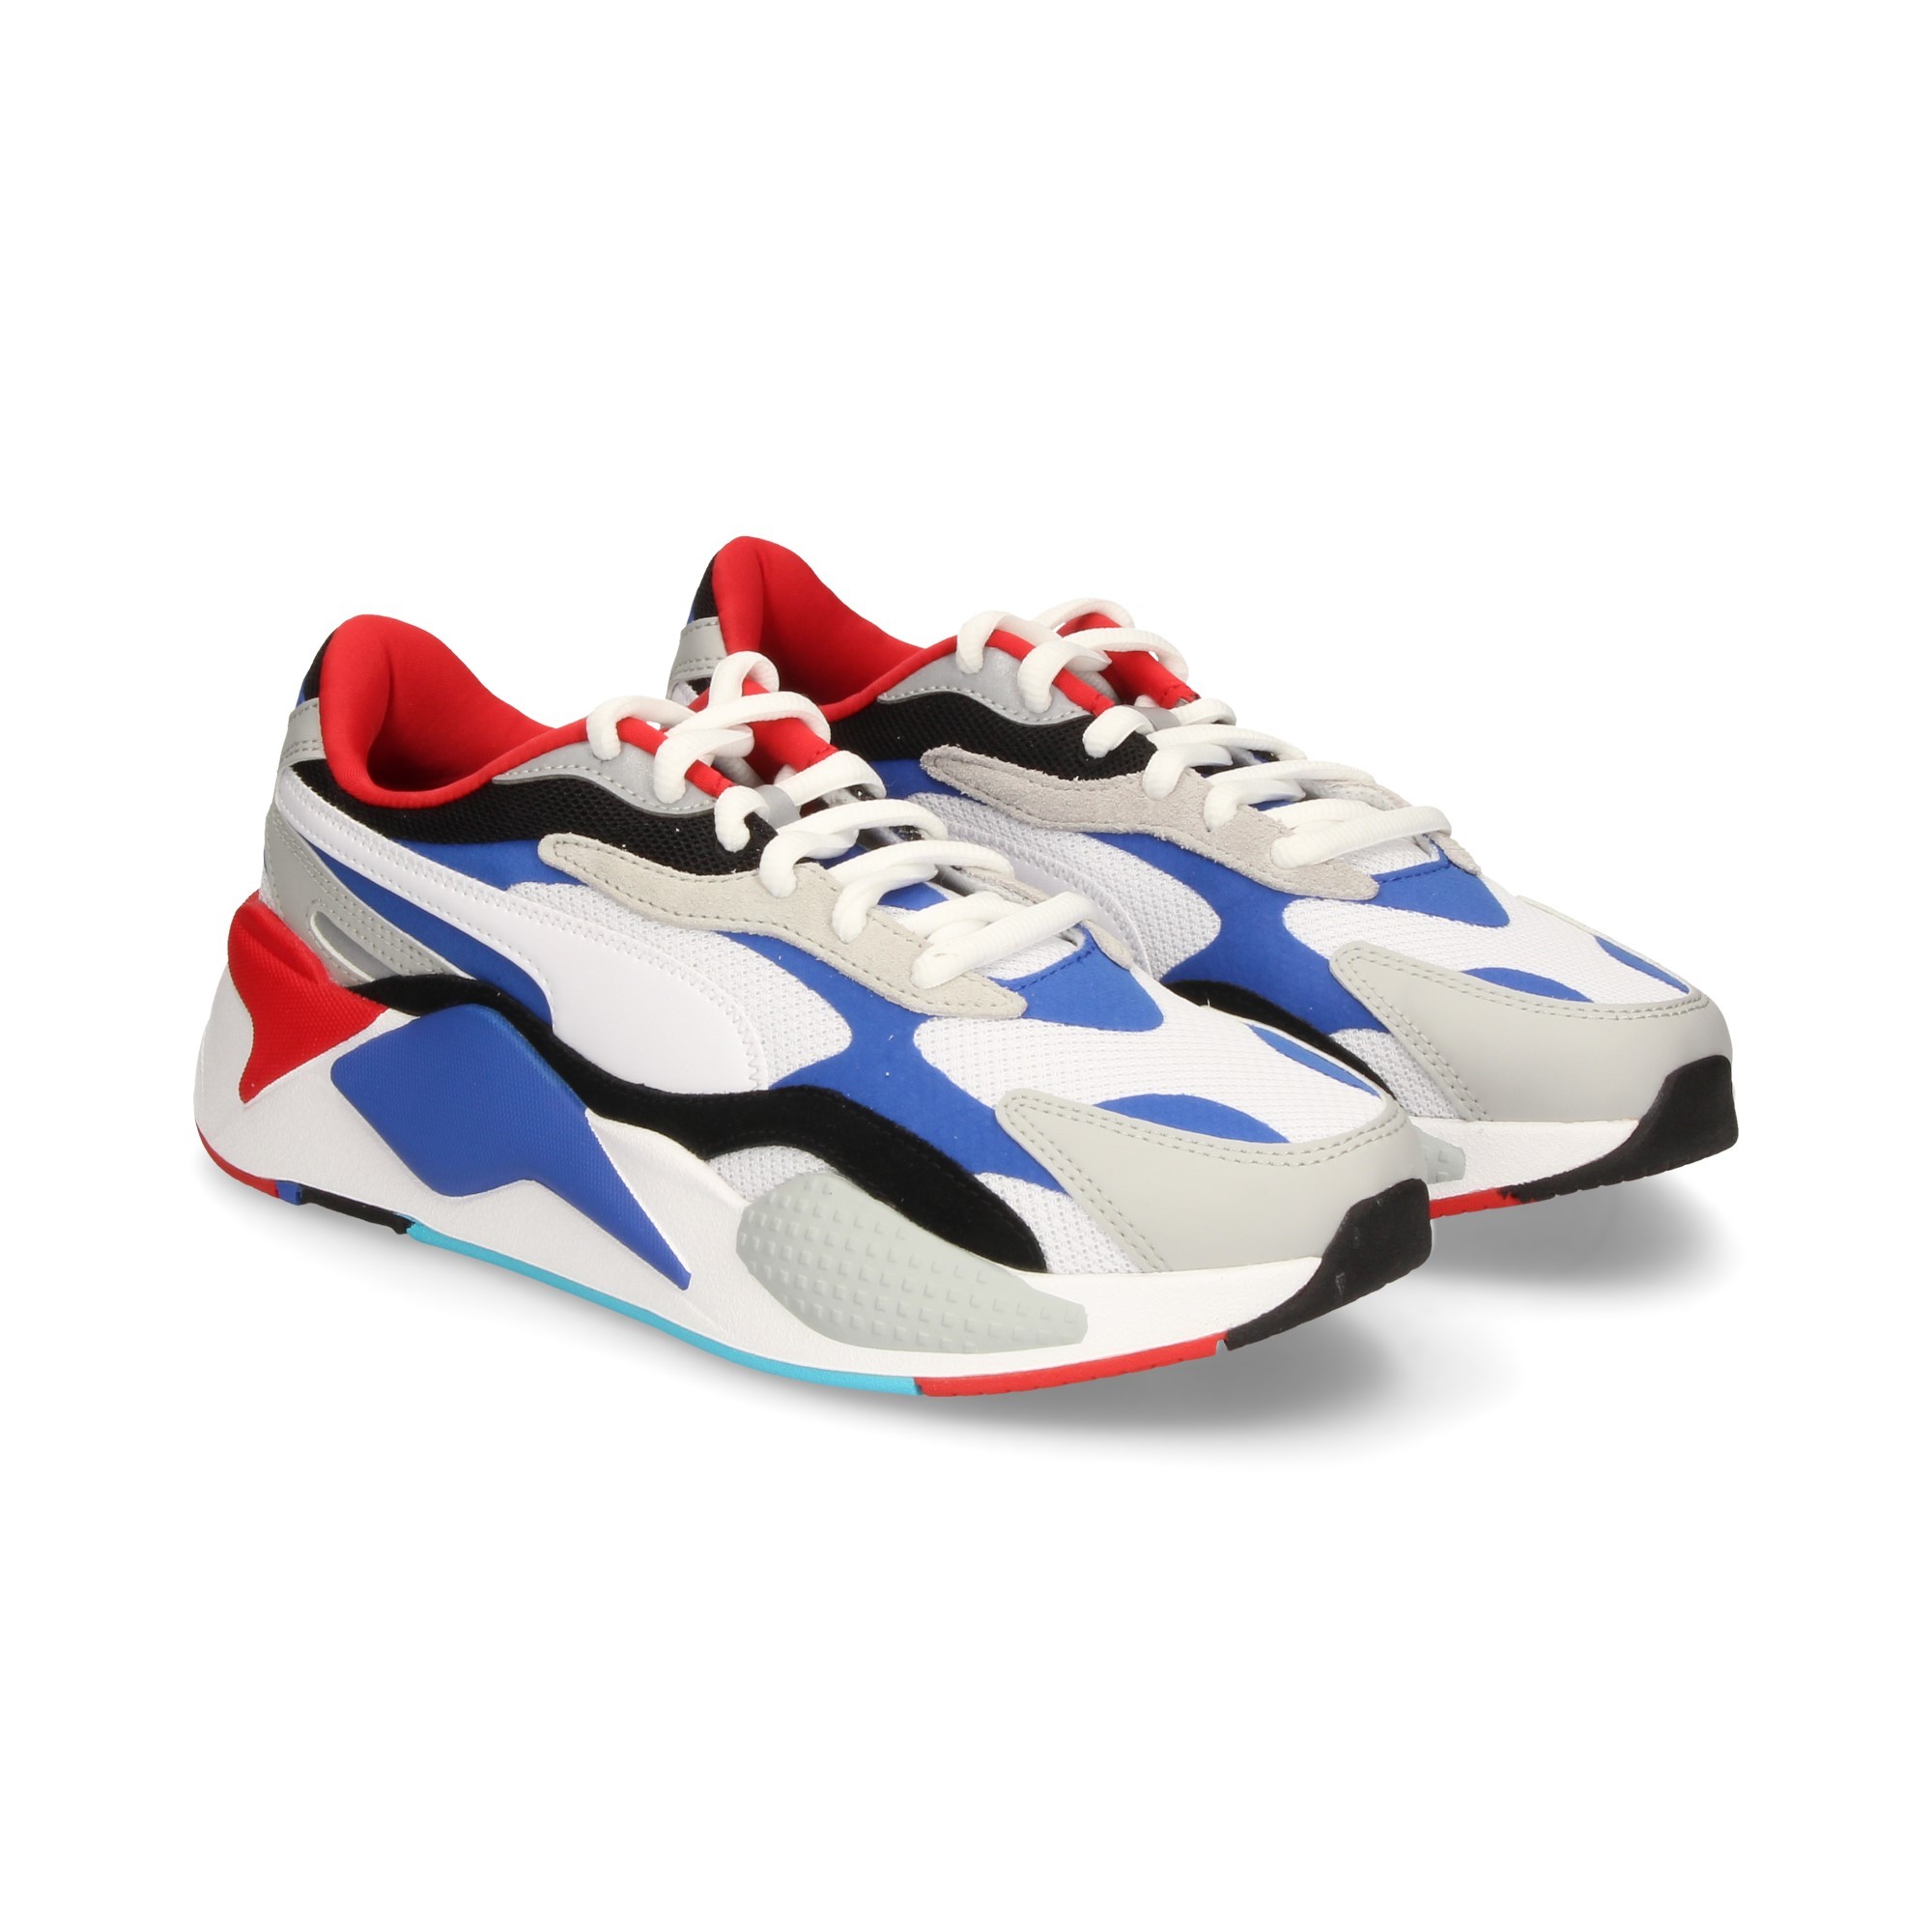 sporty-mesh-puzzle-white-blue-red